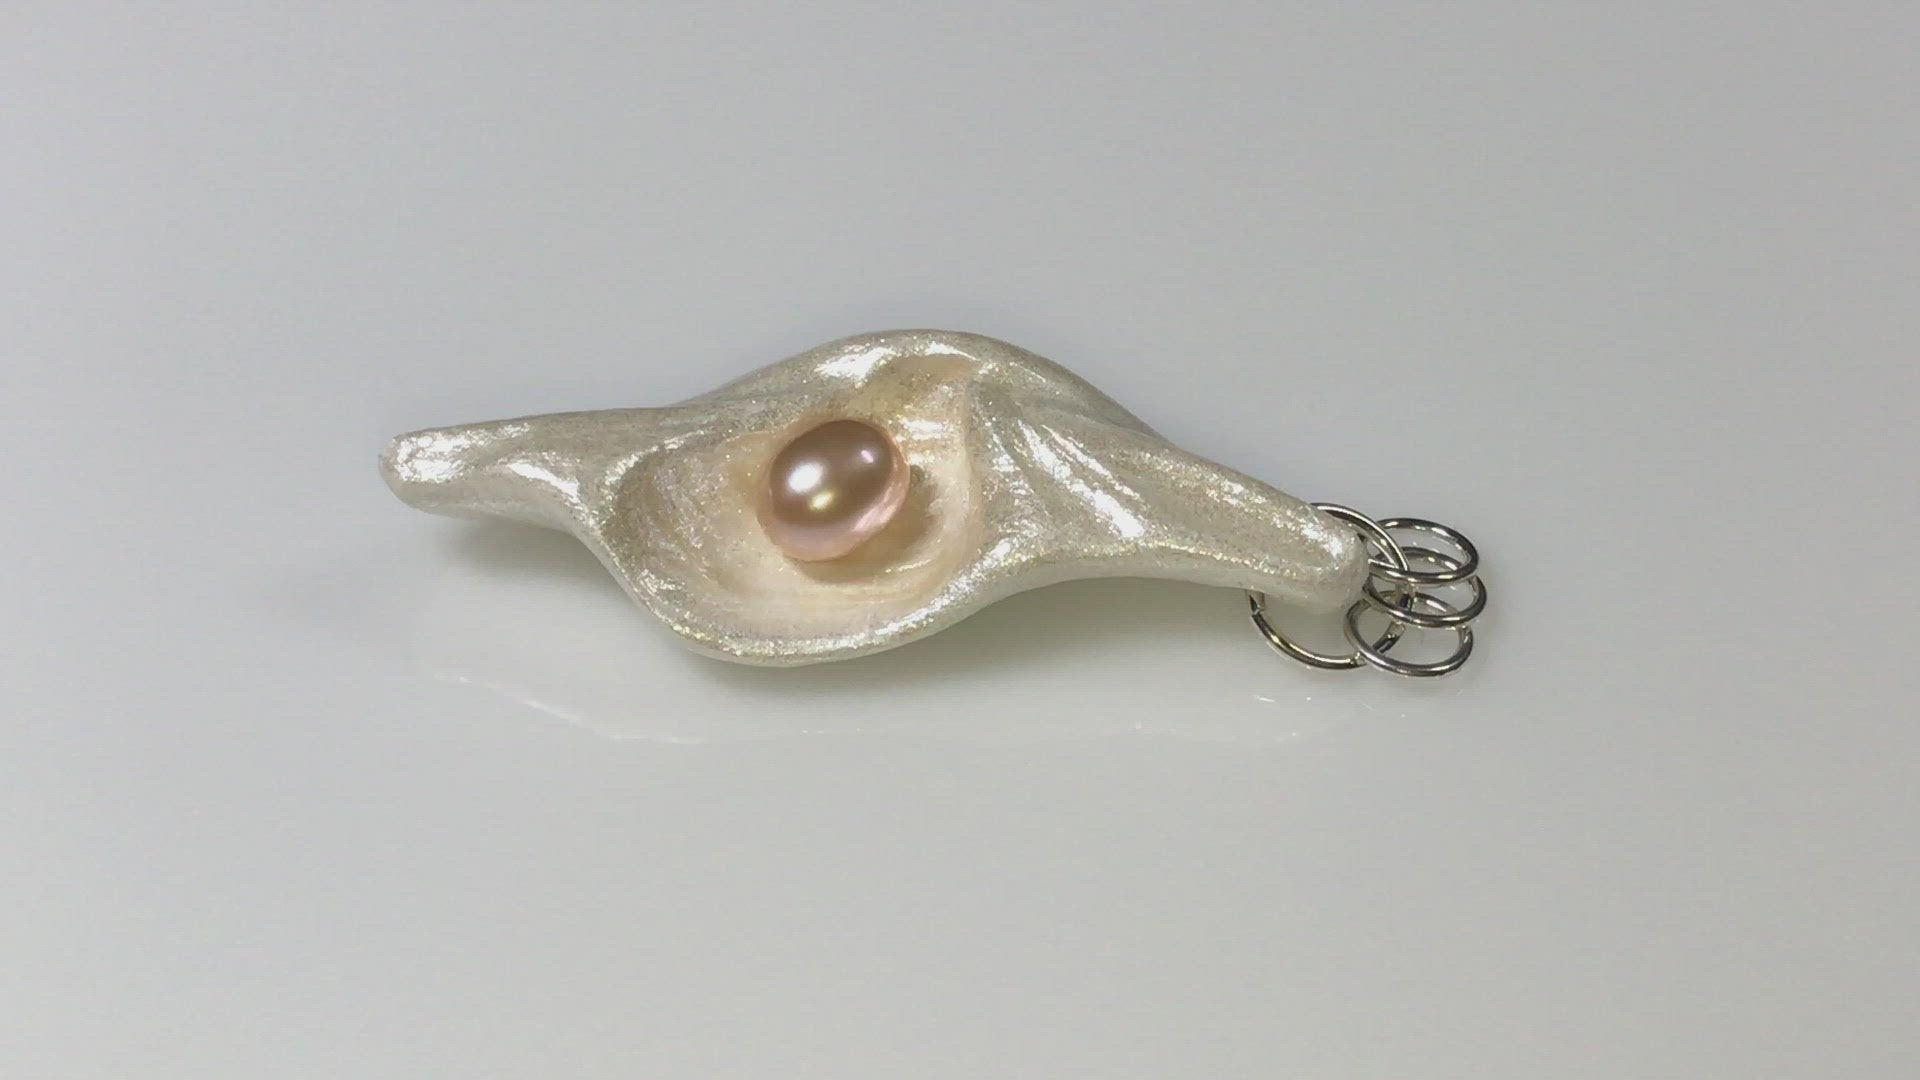 A video showing Glow natural seashell pendant with a pink freshwater pearl. 